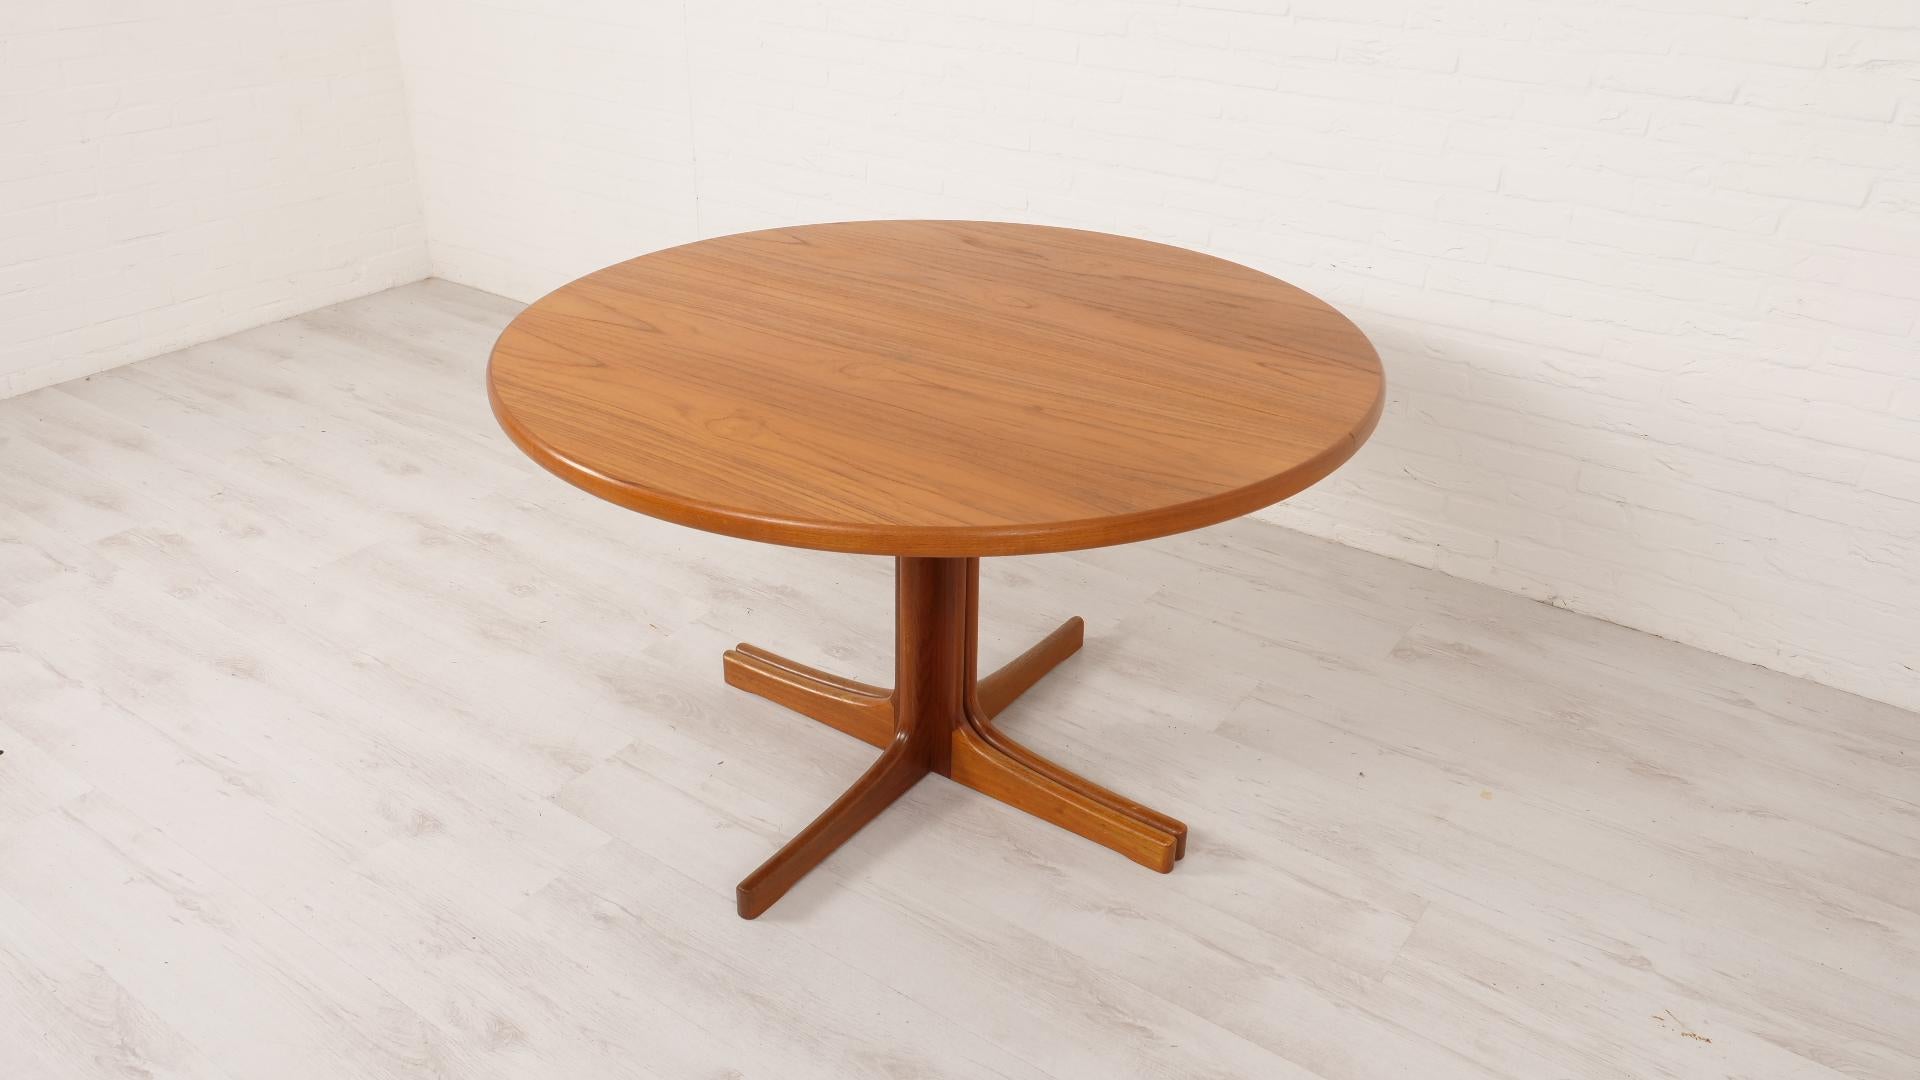 This vintage wooden extension table is a very nice one: the round dining table is in great condition and has a very thin top. We don't come across these very often! The teak dining table can be extended with 2 spacers and becomes oval. This leaves